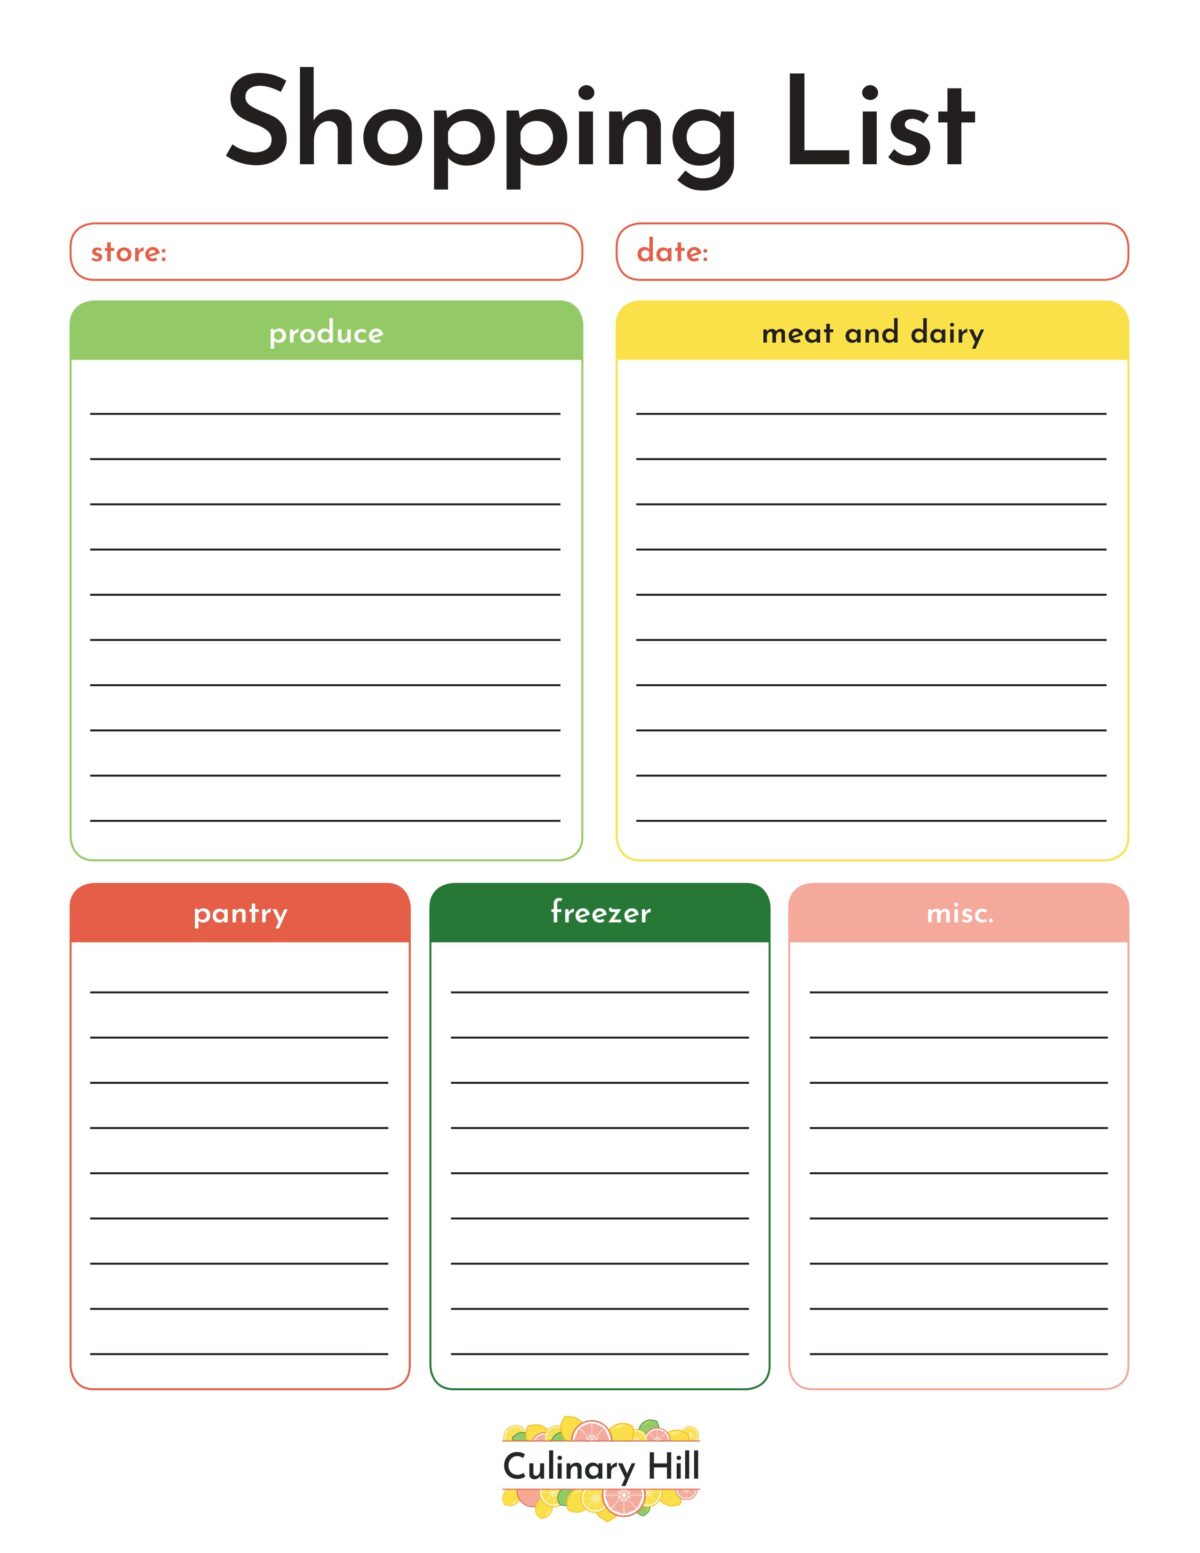 A printable shopping list template from Culinary Hill.